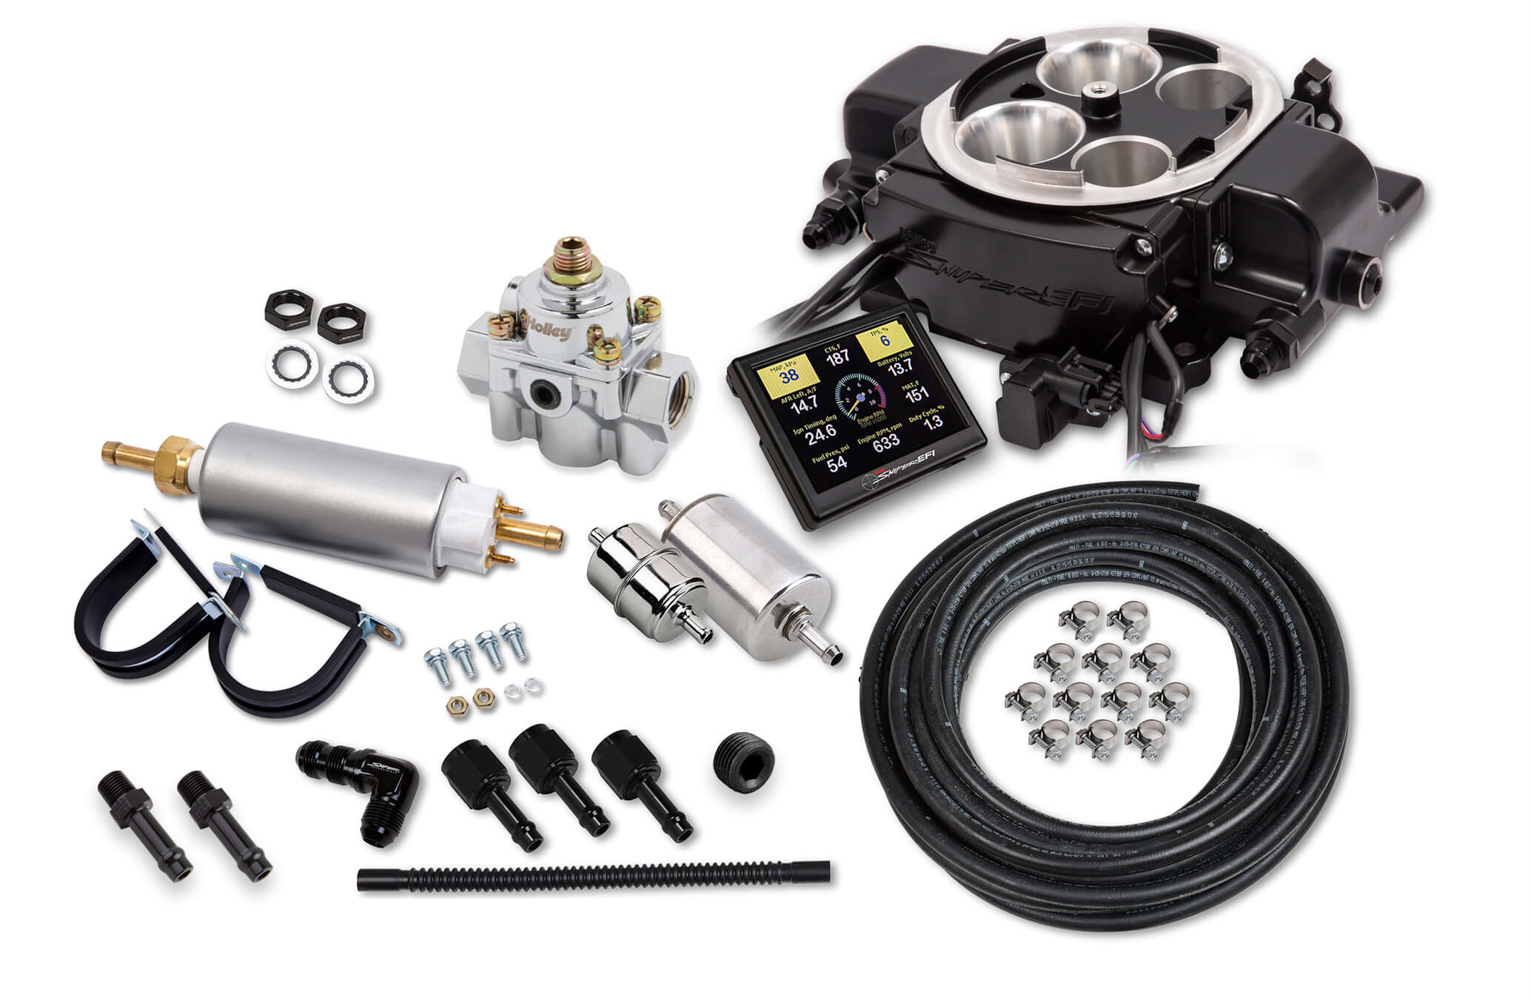 Holley 550-868K Fuel Injection System, Sniper EFI Quadrajet, Inline Fuel Pump / Wiring / Hardware Included, Software Tunable, Plug-and-Play, GM, Kit